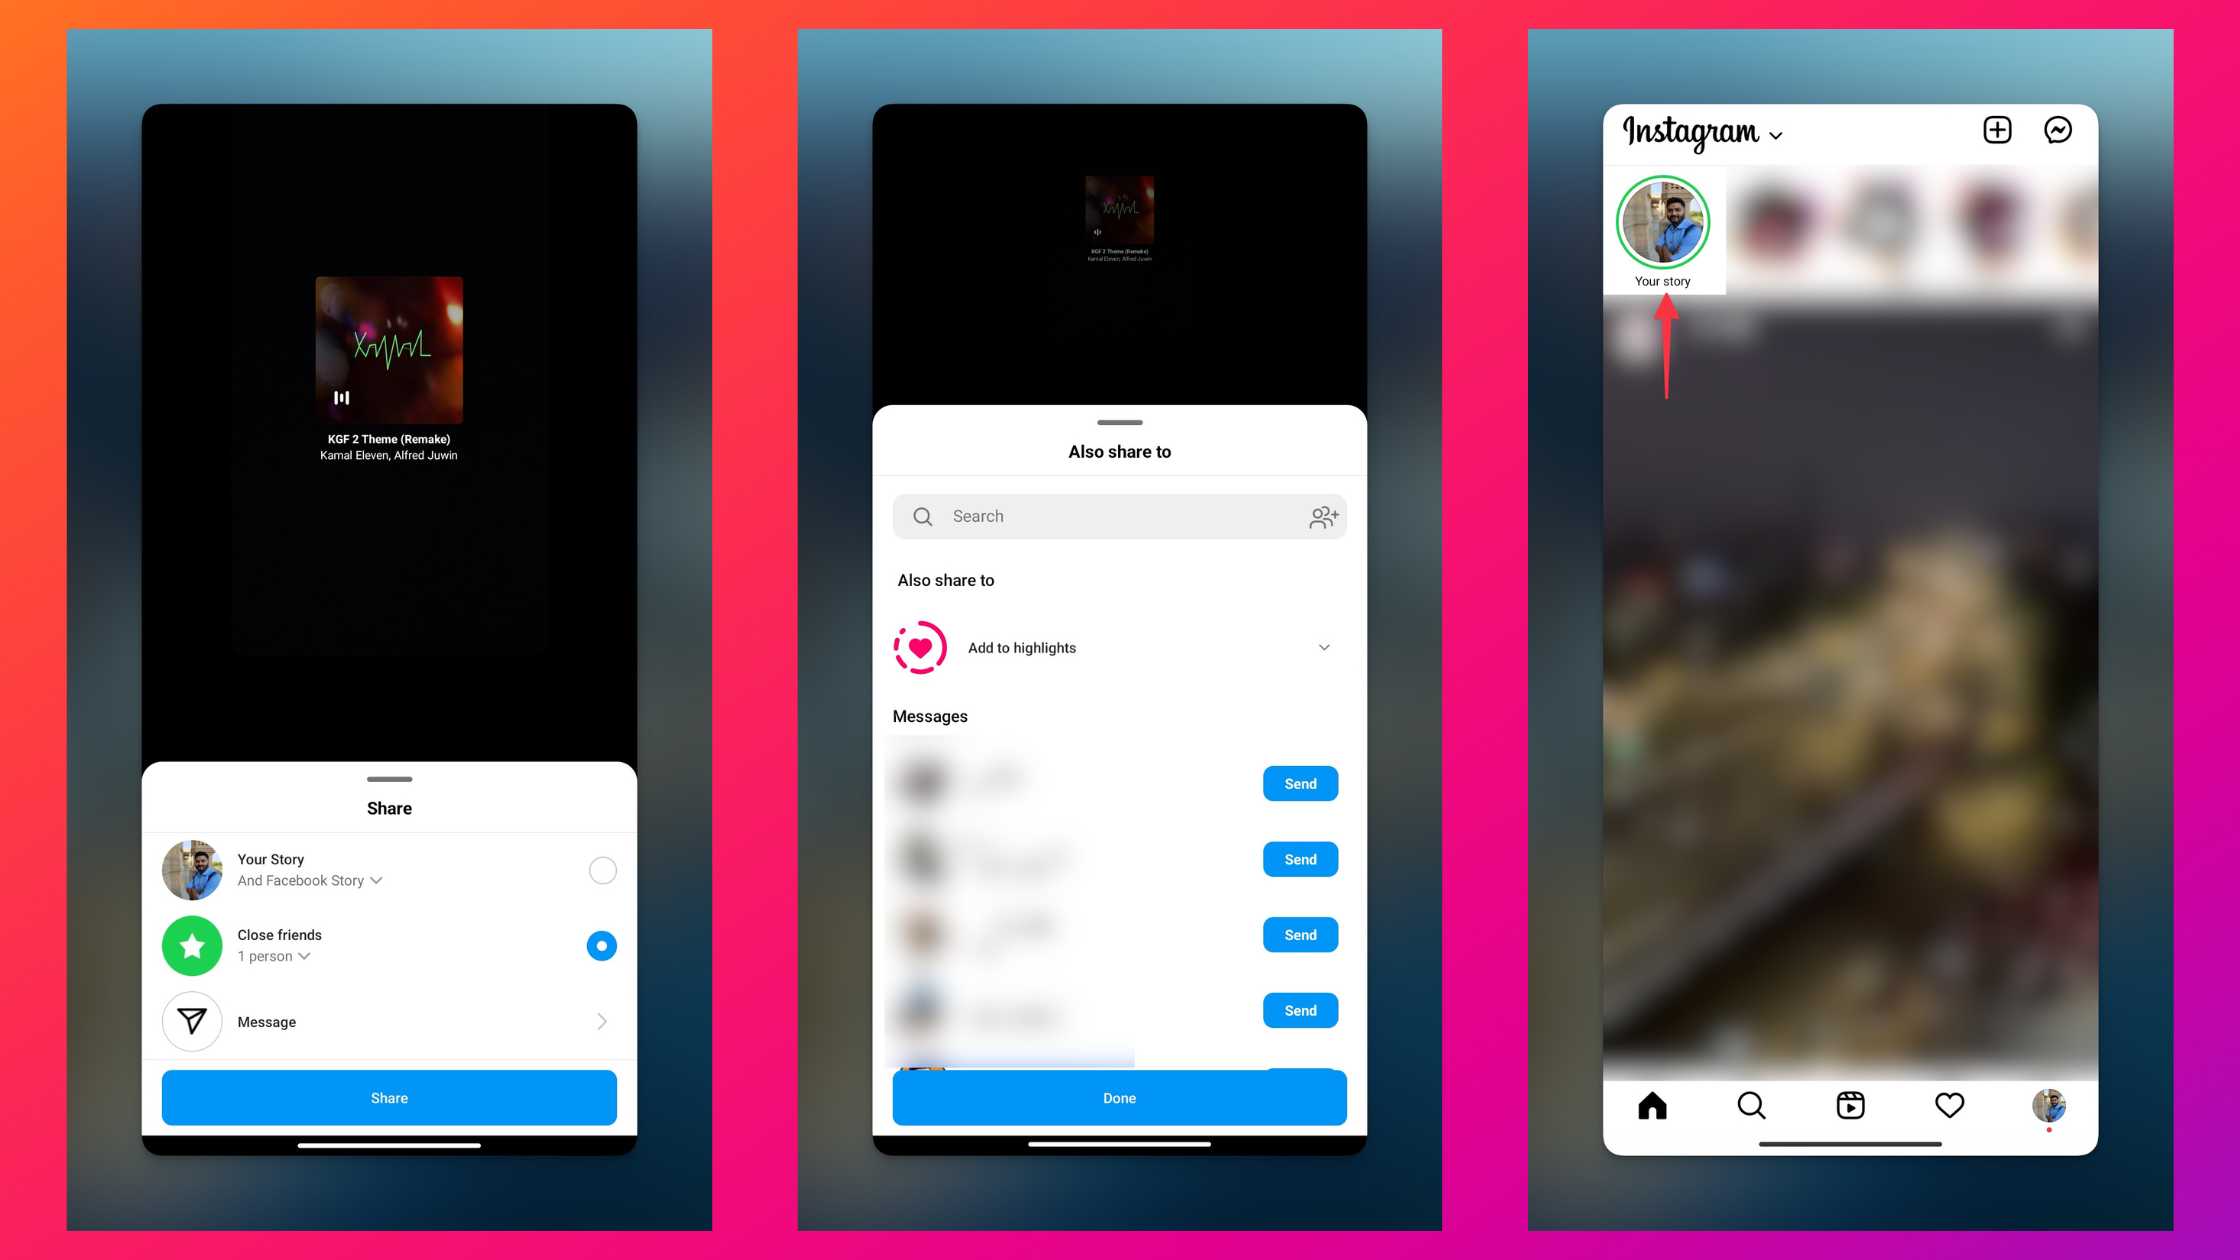 Remote.tools shows how to share published stories with following and close friends on Instagram app for Android